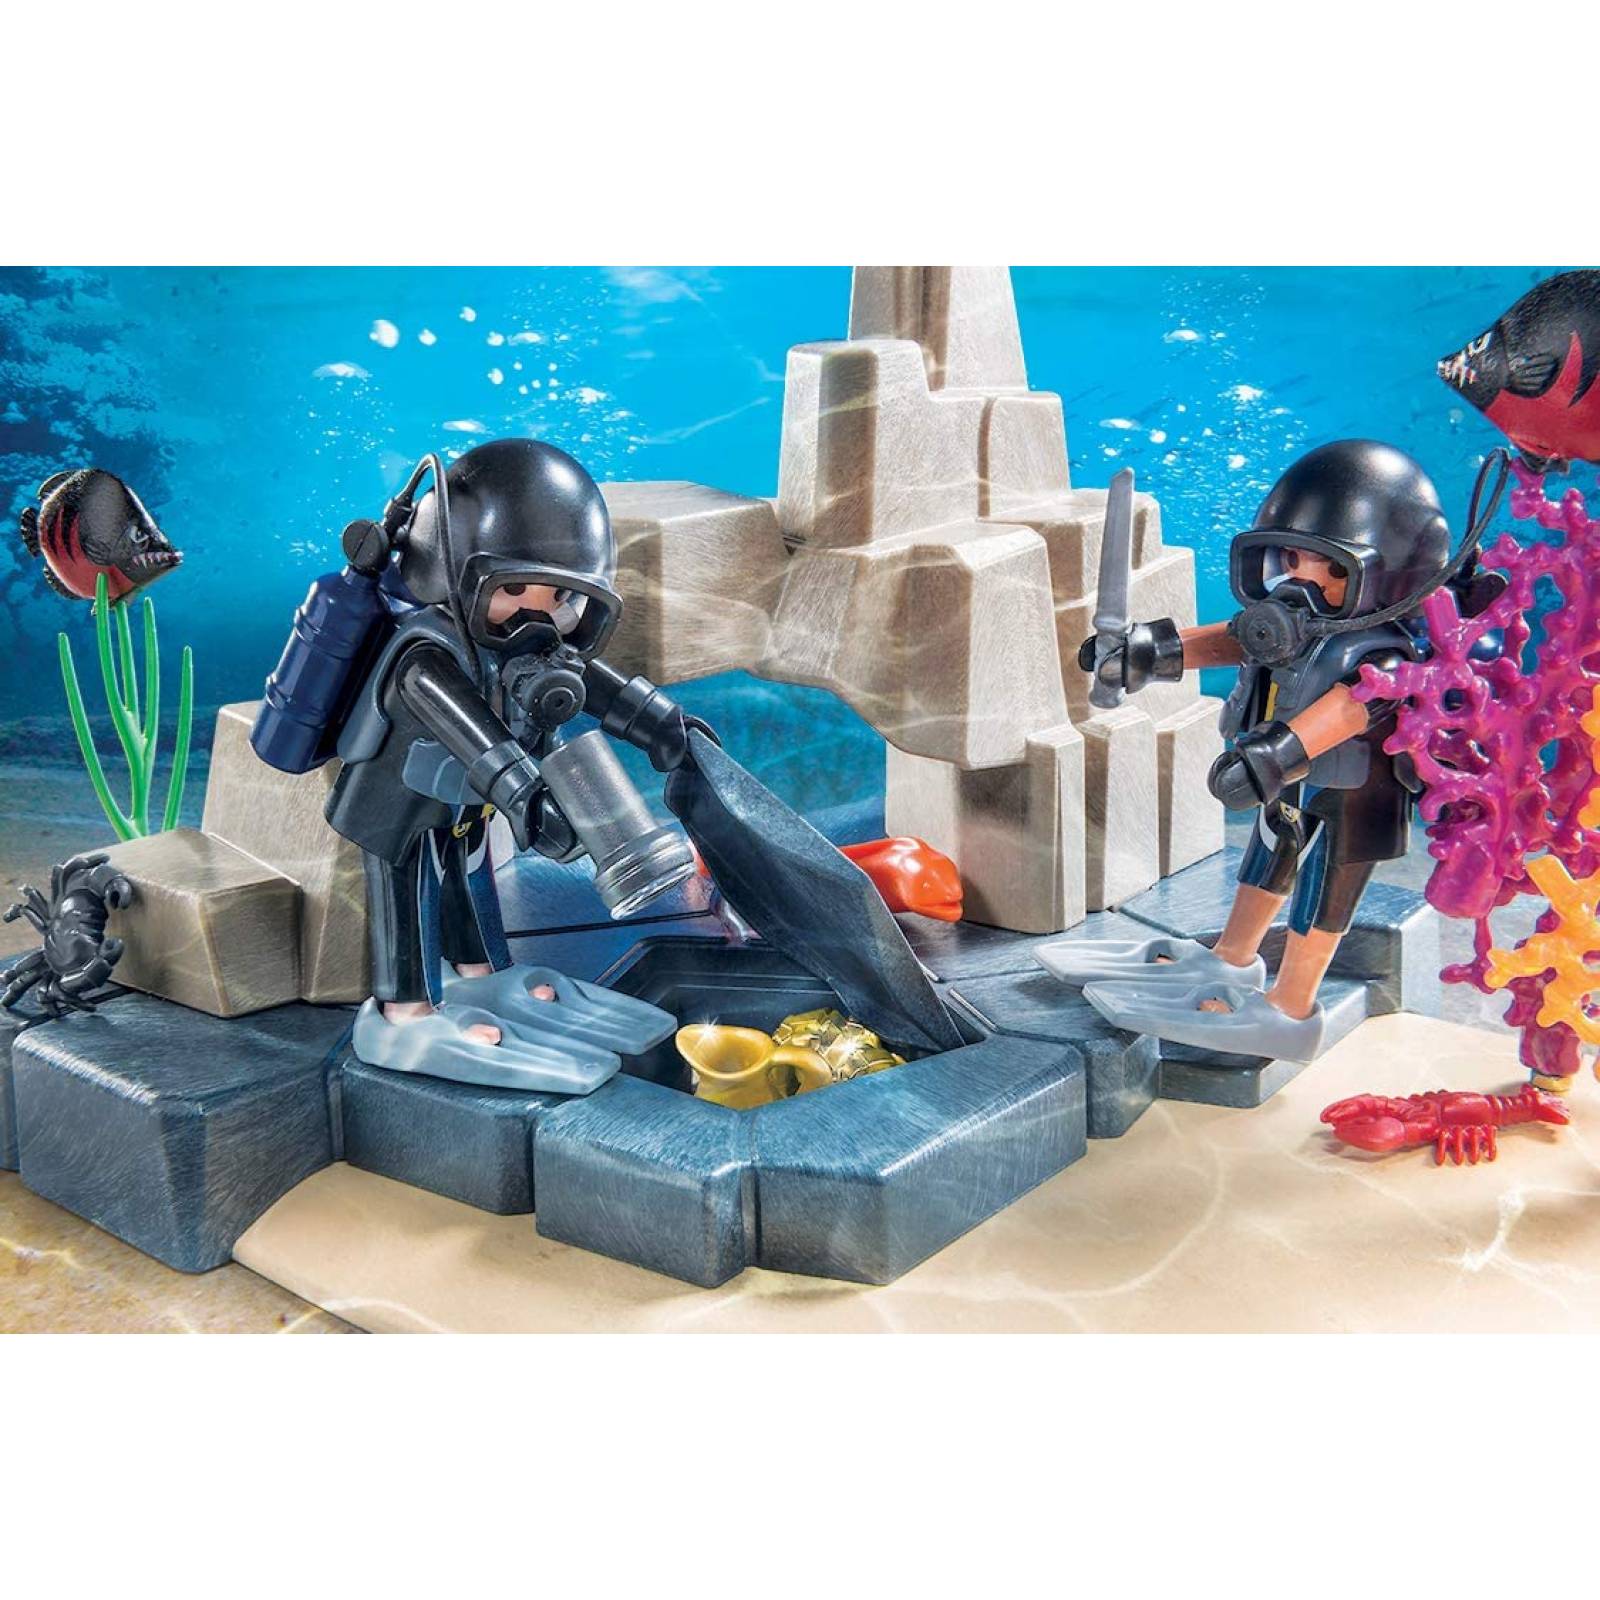 Pm Playmobil Sek Diving Operation Playset  Limited Edtion